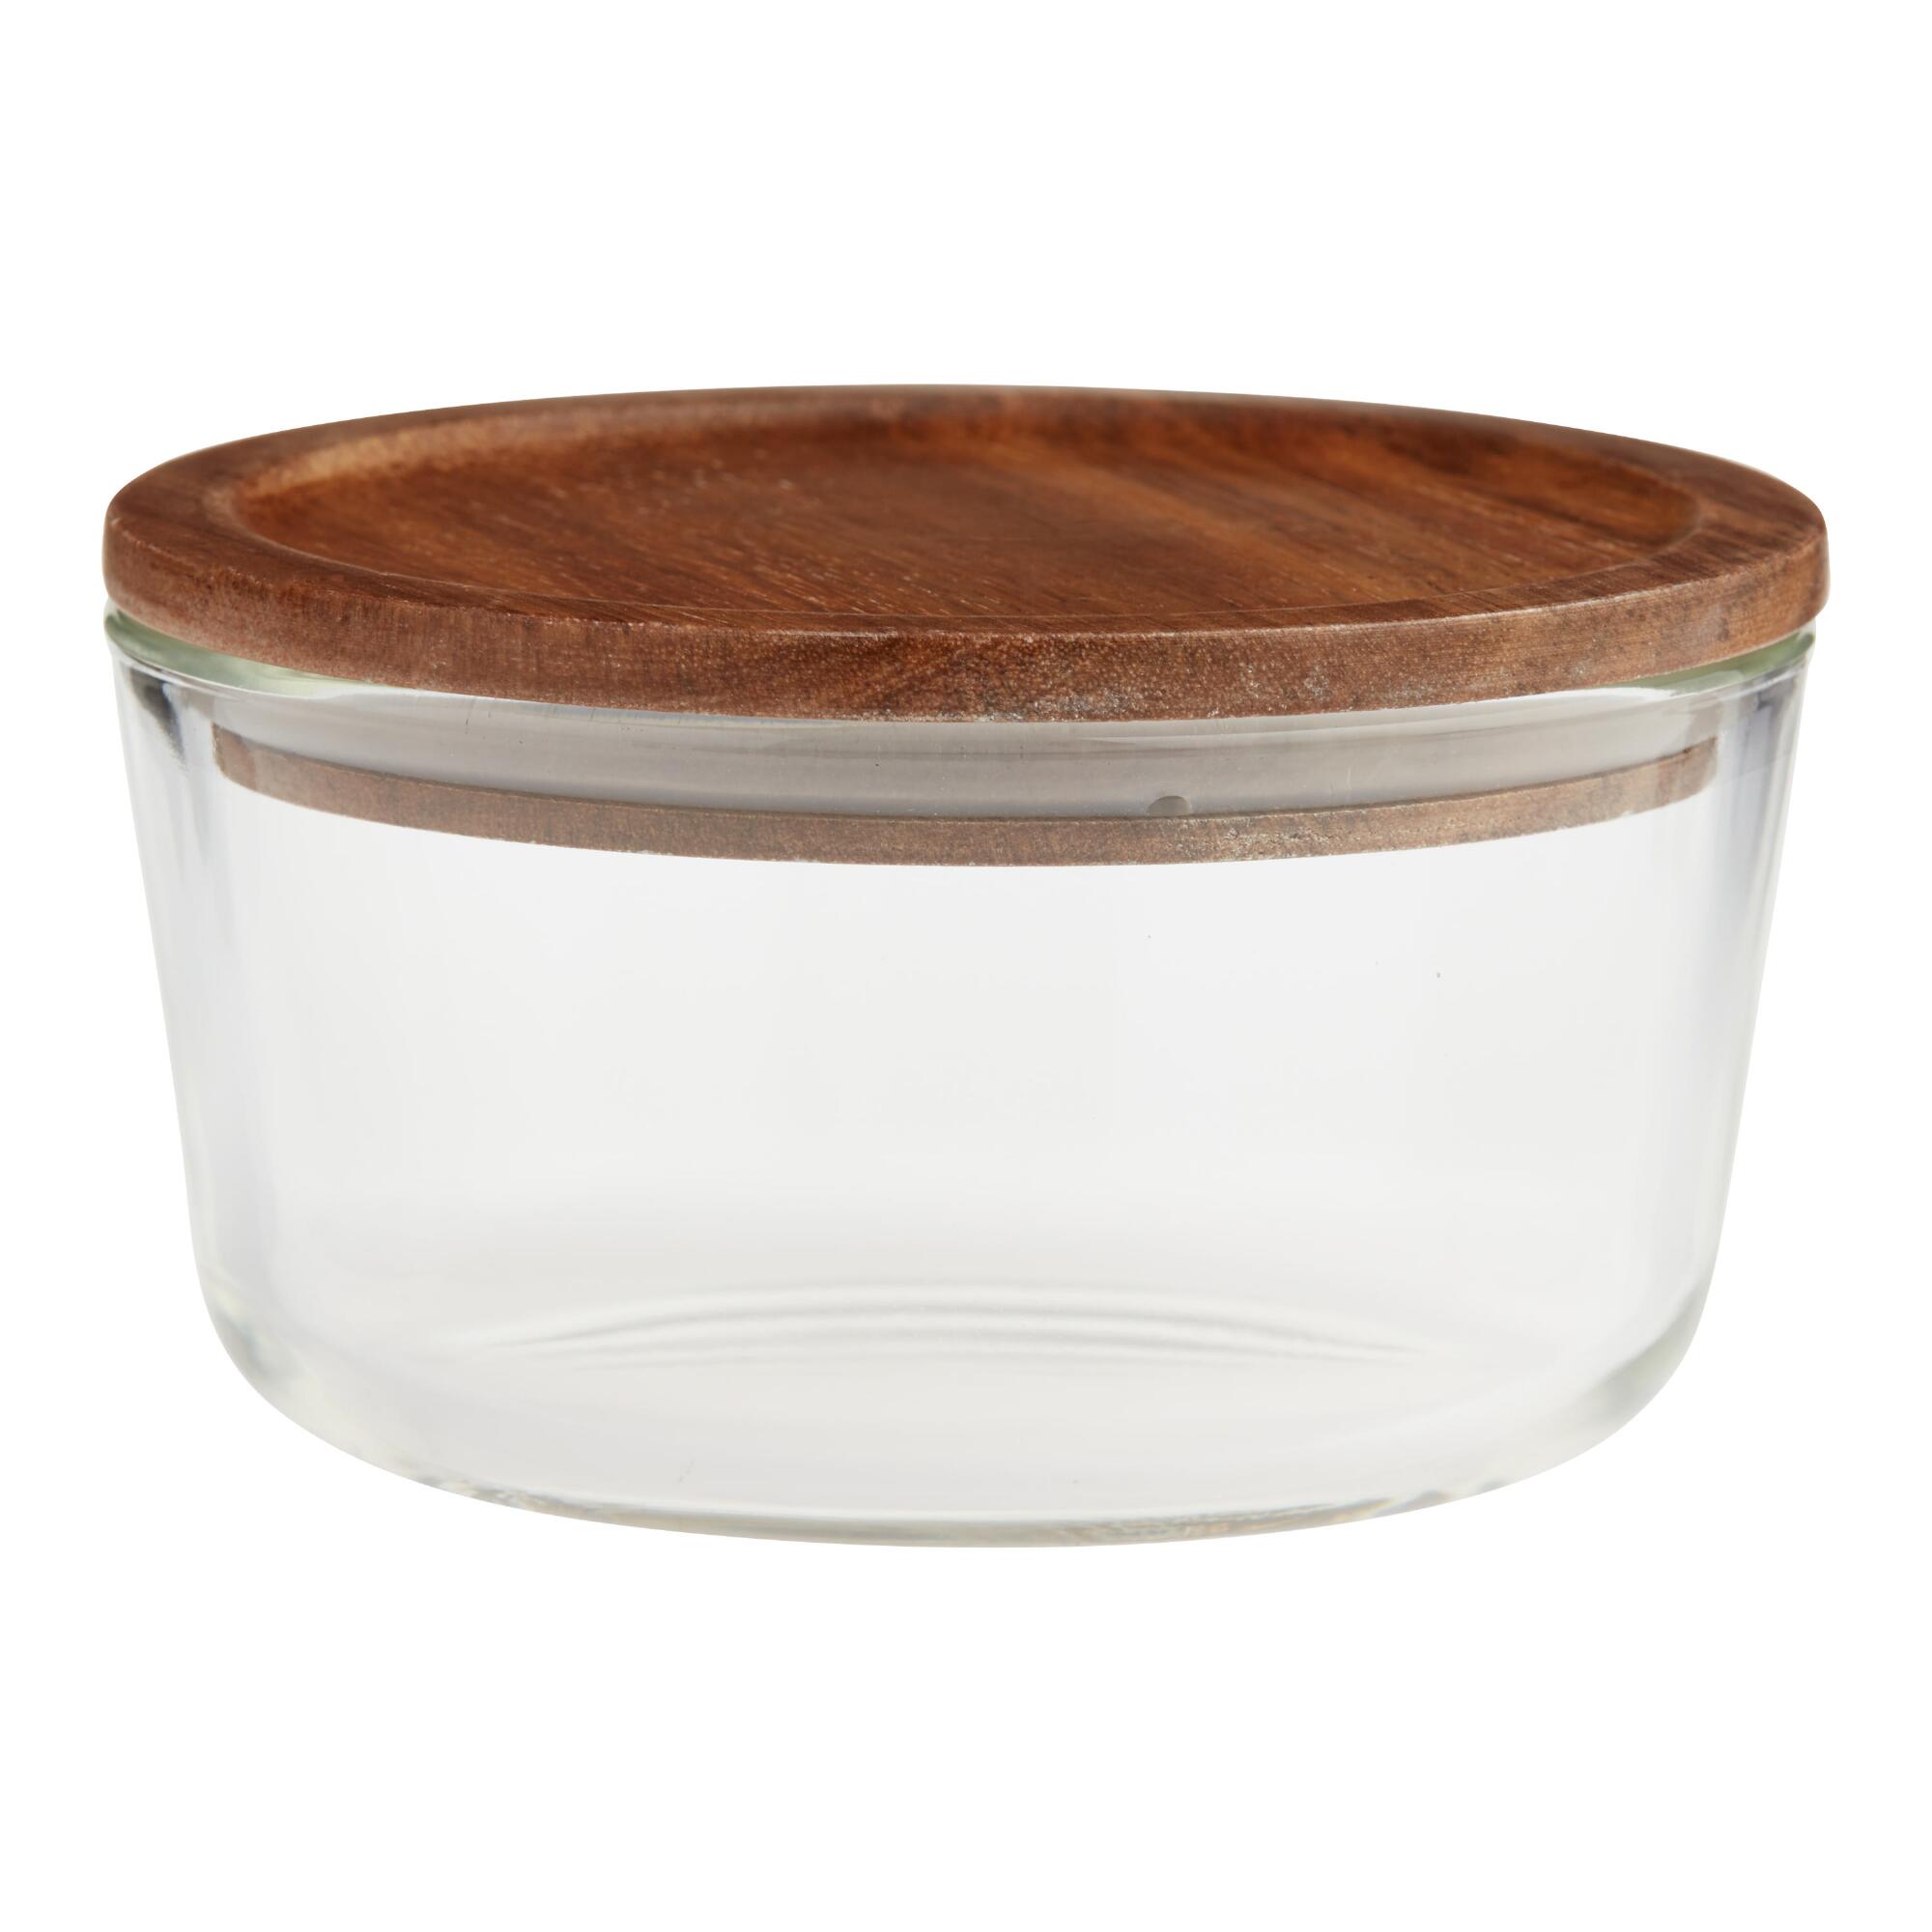 Medium Glass Food Storage Container with Wood Lid: Multi by World Market